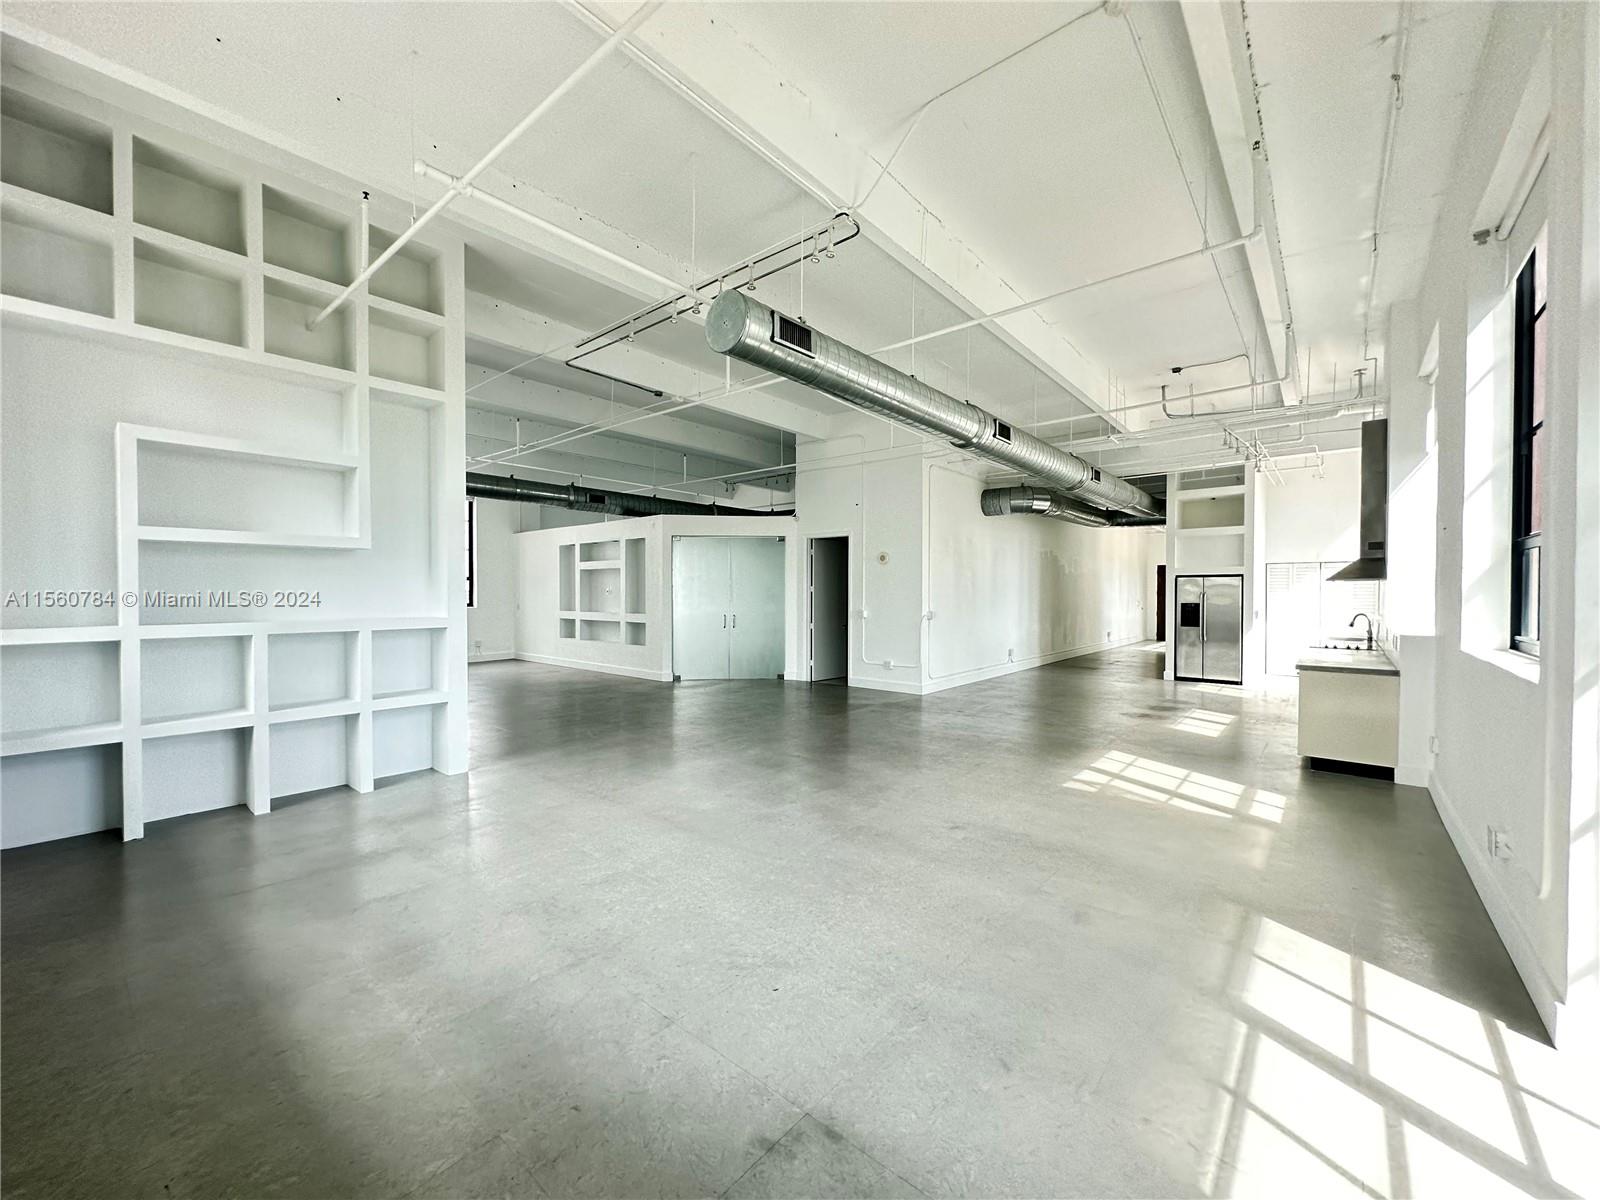 Bright White Loft Space! Tons of Light. Large open floor plan, with 15' ceilings, this industrial loft is available for short term rental min 3 months - 9 months. 2 enclosed bedrooms and 1 large bathroom plus pantry with full size washer dryer.  Large wrap around balcony and 1 parking included. Call or text LA easy to show unit vacant.